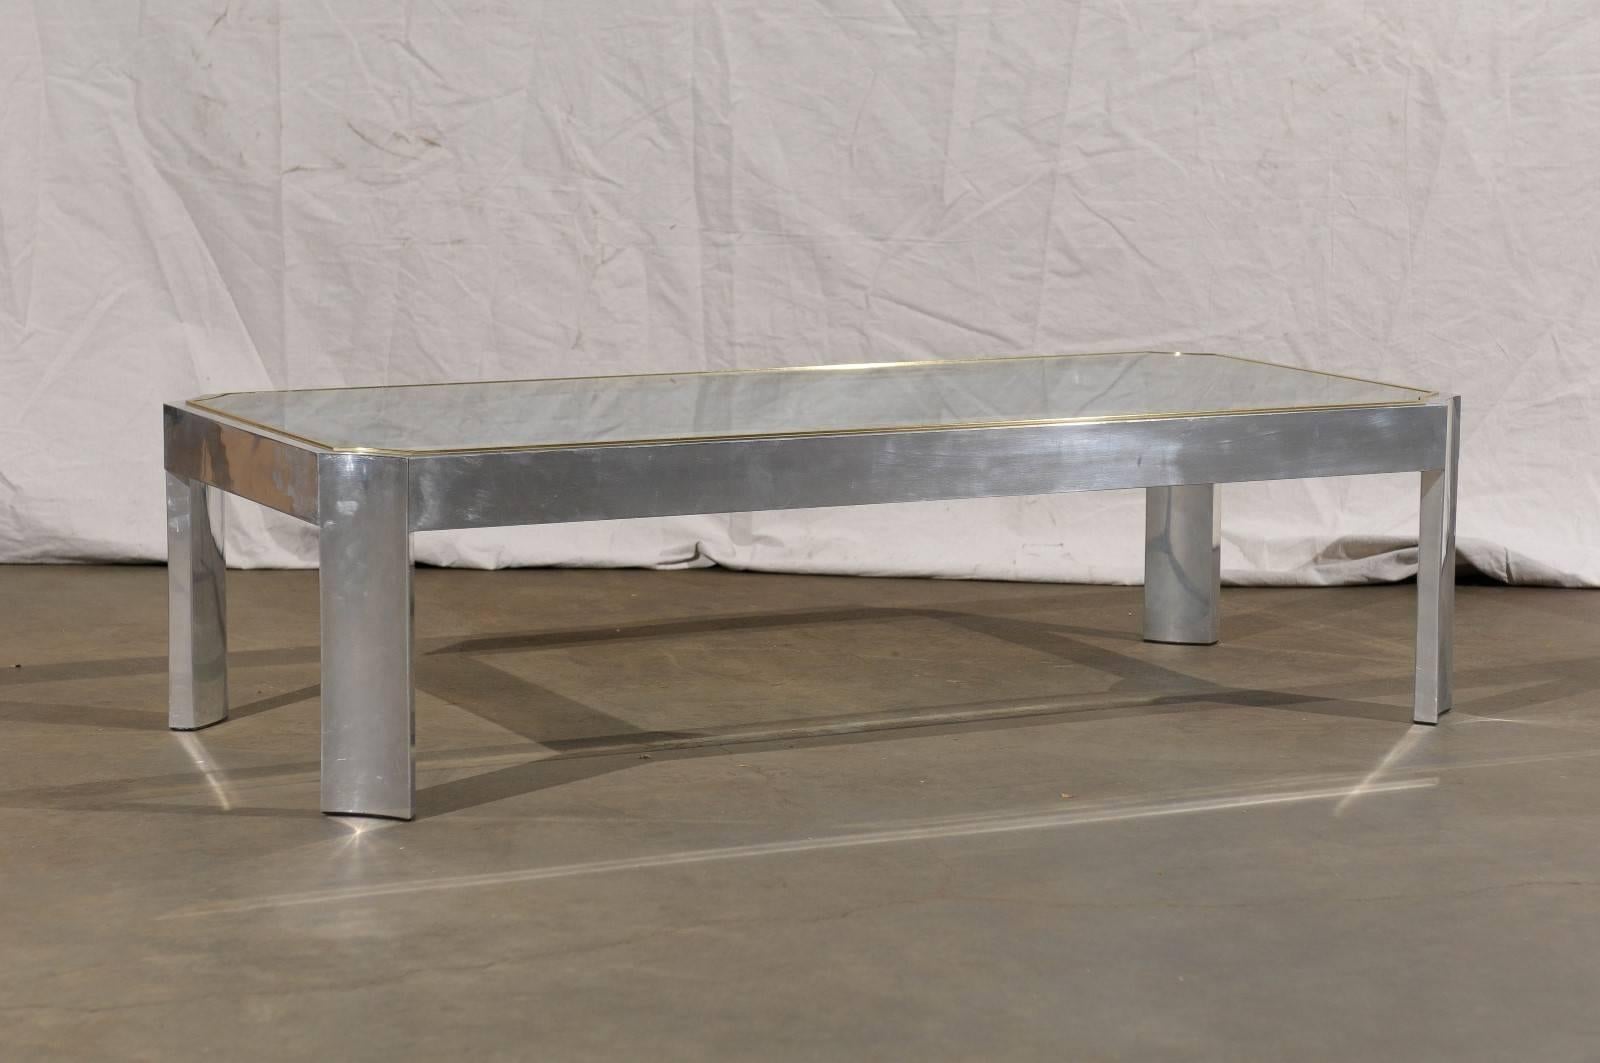 Aluminium and brass coffee table In the style of Ron Selfe, circa 1970.